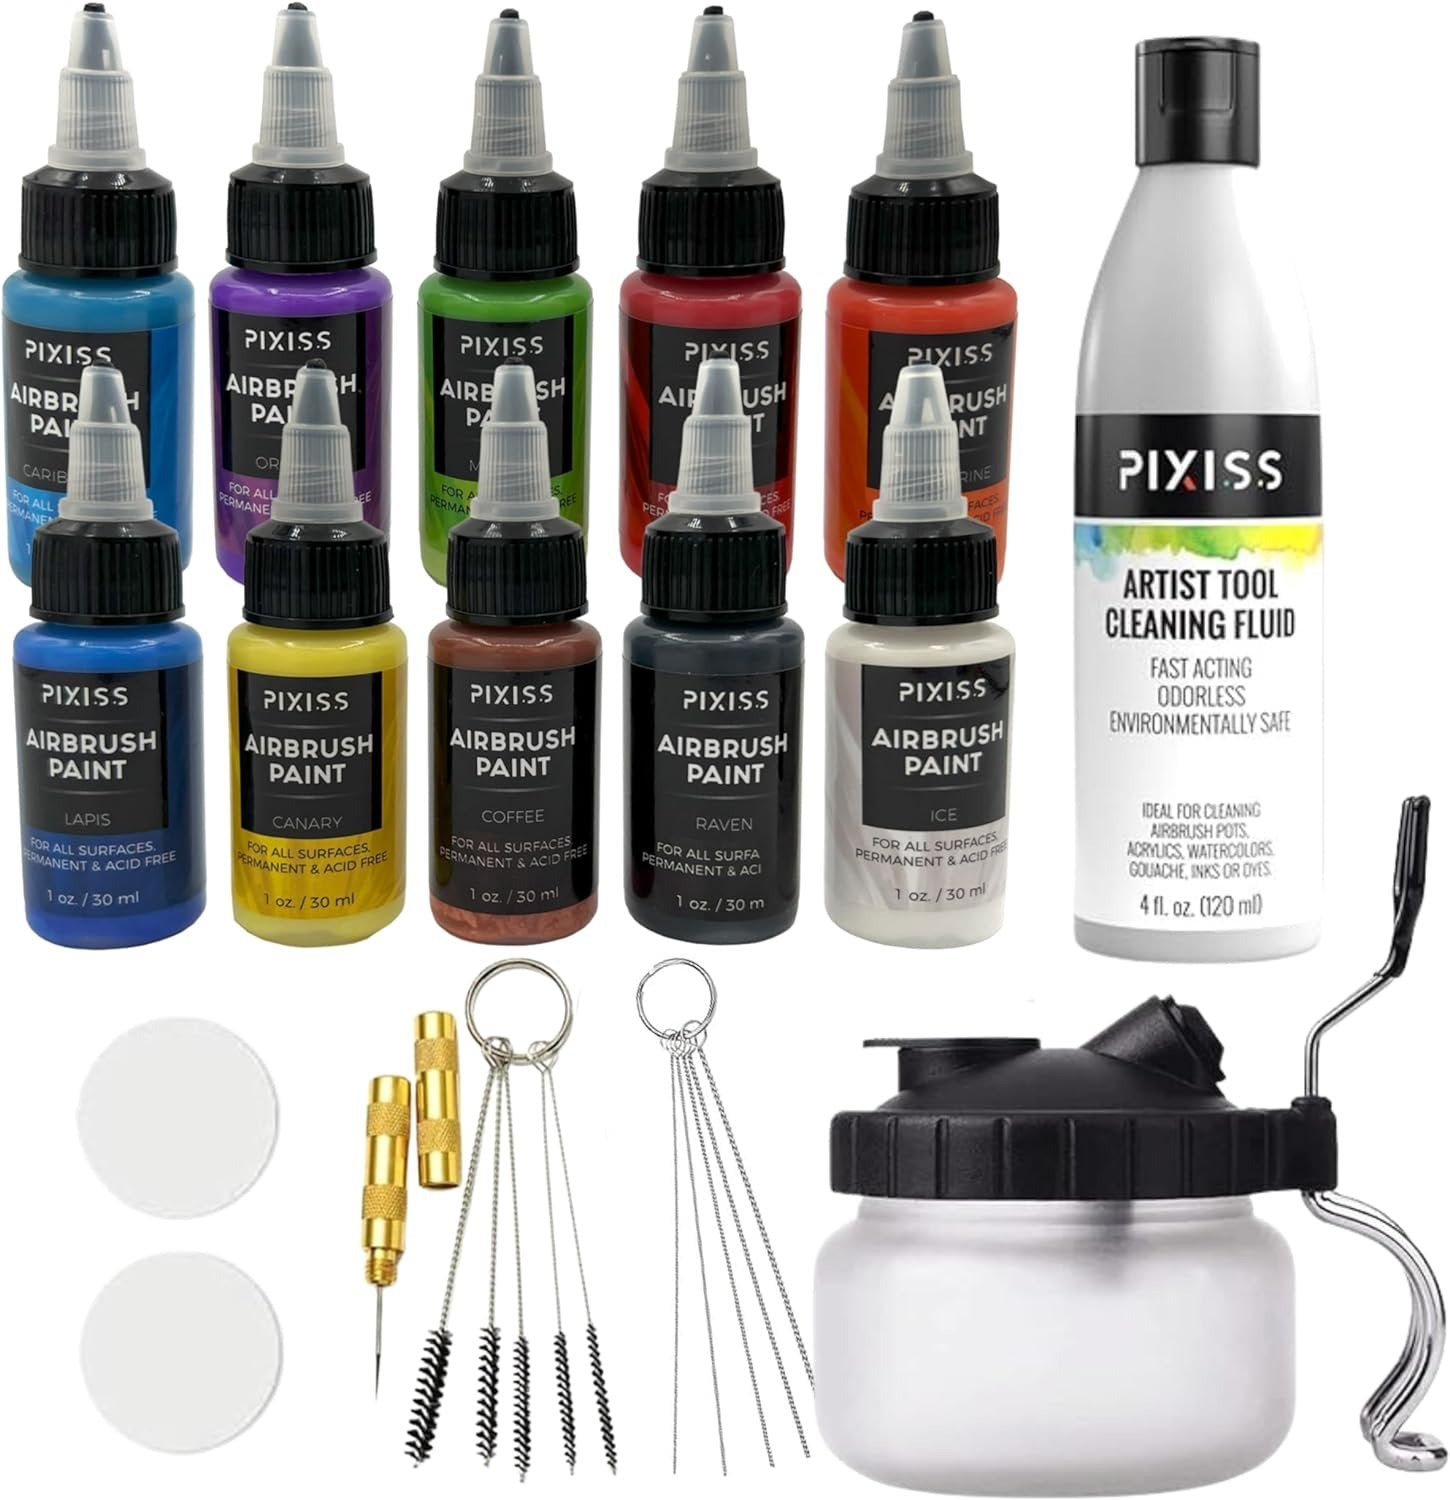 Airbrush Cleaning Kit, Pixiss Glass Cleaning Pot Jar with Holder, 5pc  Cleaning Needles, 5pc Cleaning Brushes, 1 Wash Needle, 2 Extra Filters